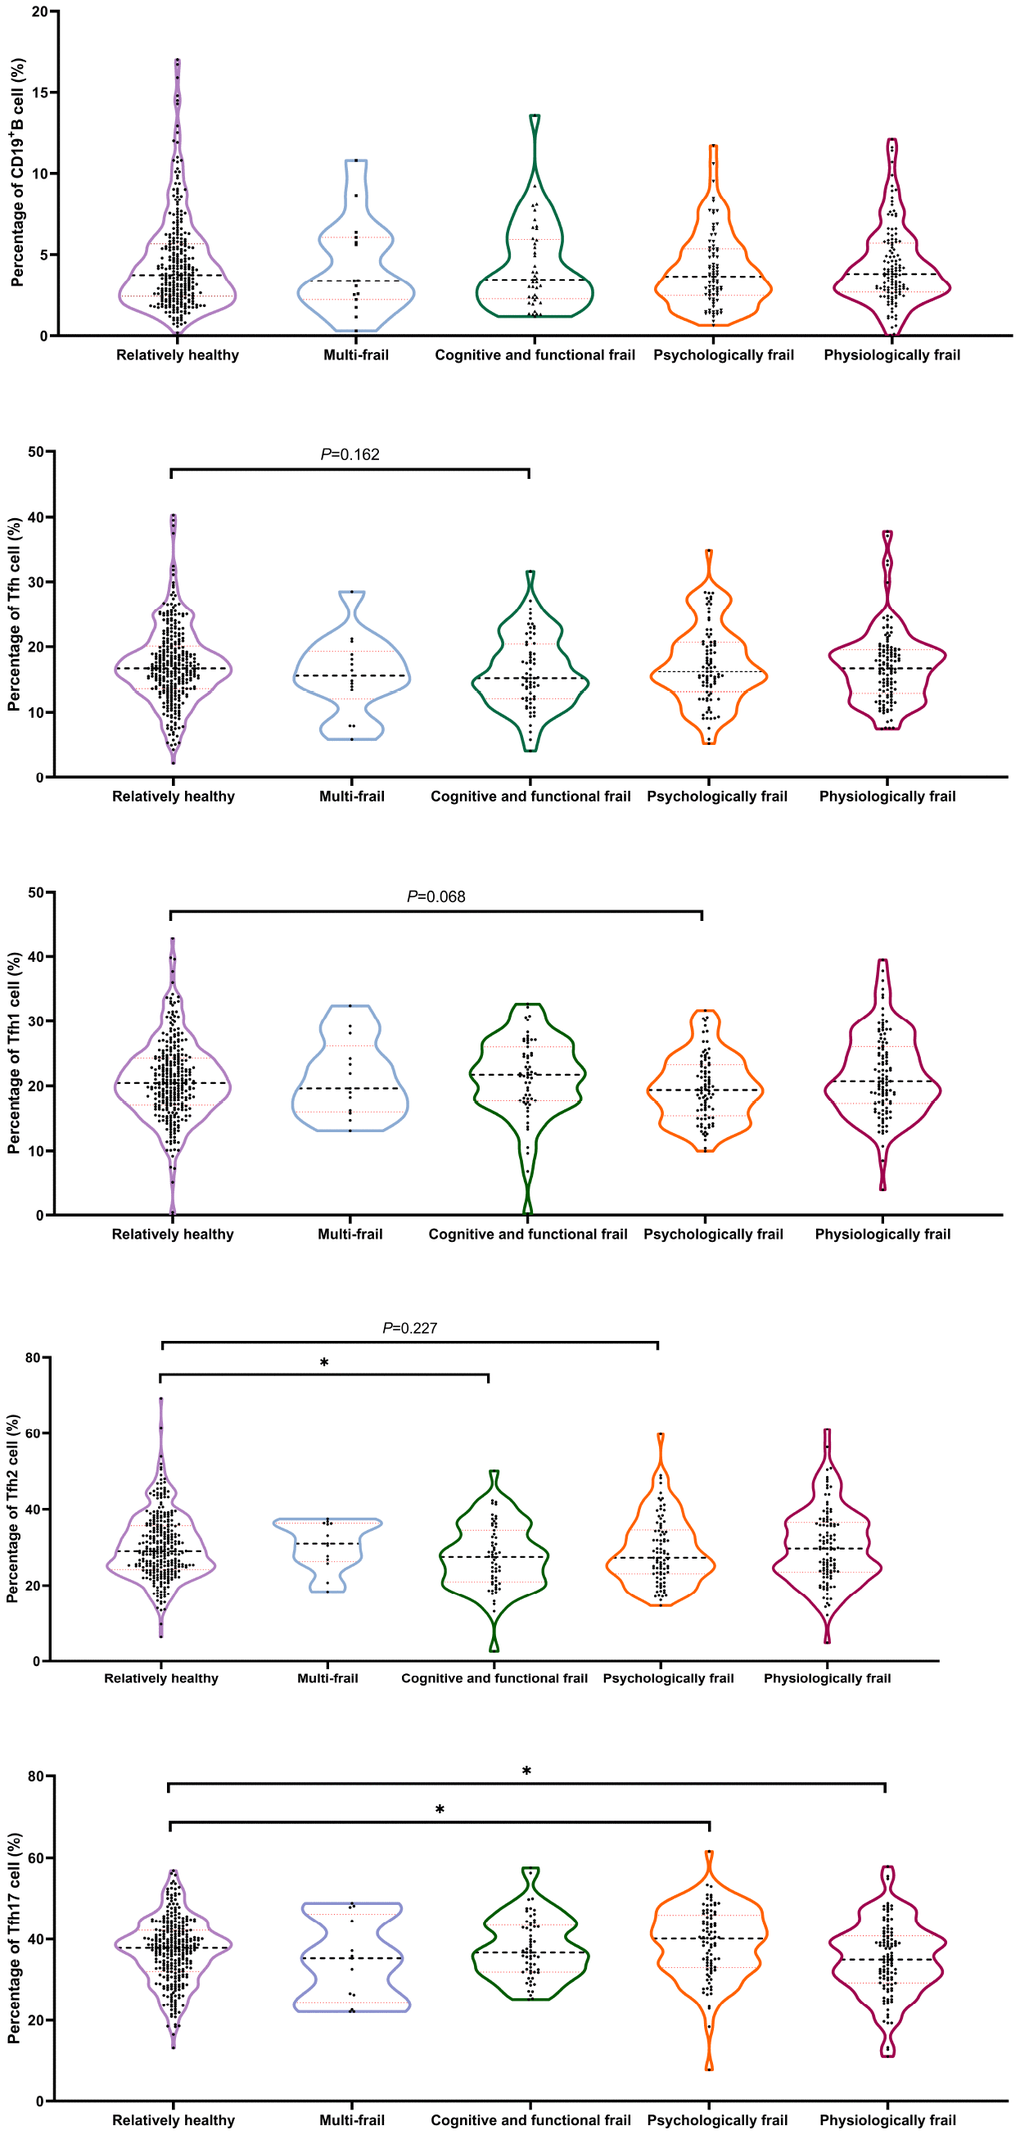 Comparison of the Tfh cell and subsets proportions in the CD4+T cell in old individuals categorized with frailty subtypes. (N=728) “Relatively healthy” as reference; *P 